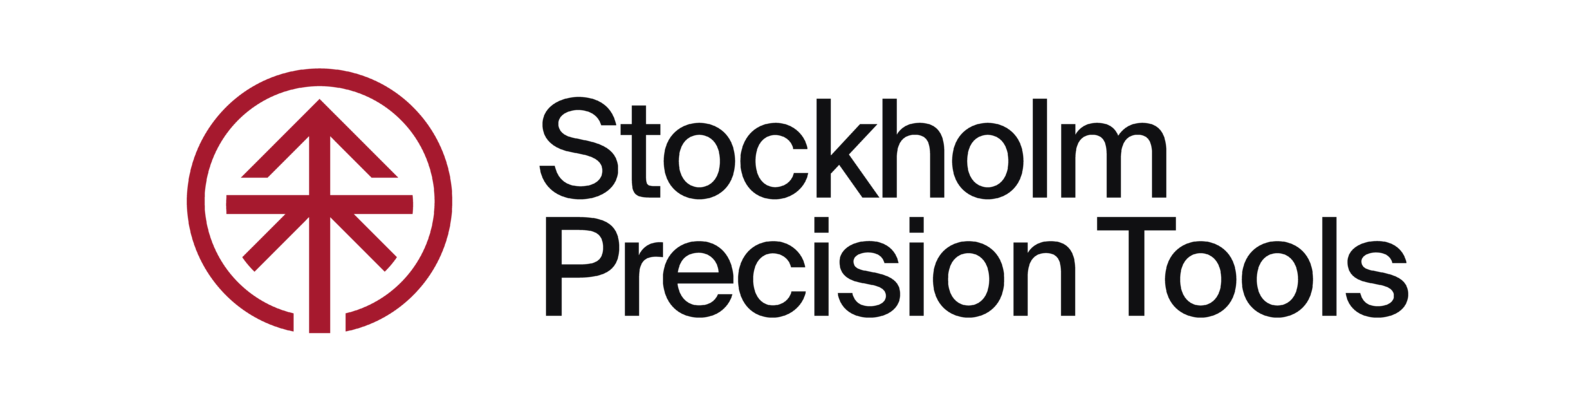 Profile image for Stockholm Precisions Tools